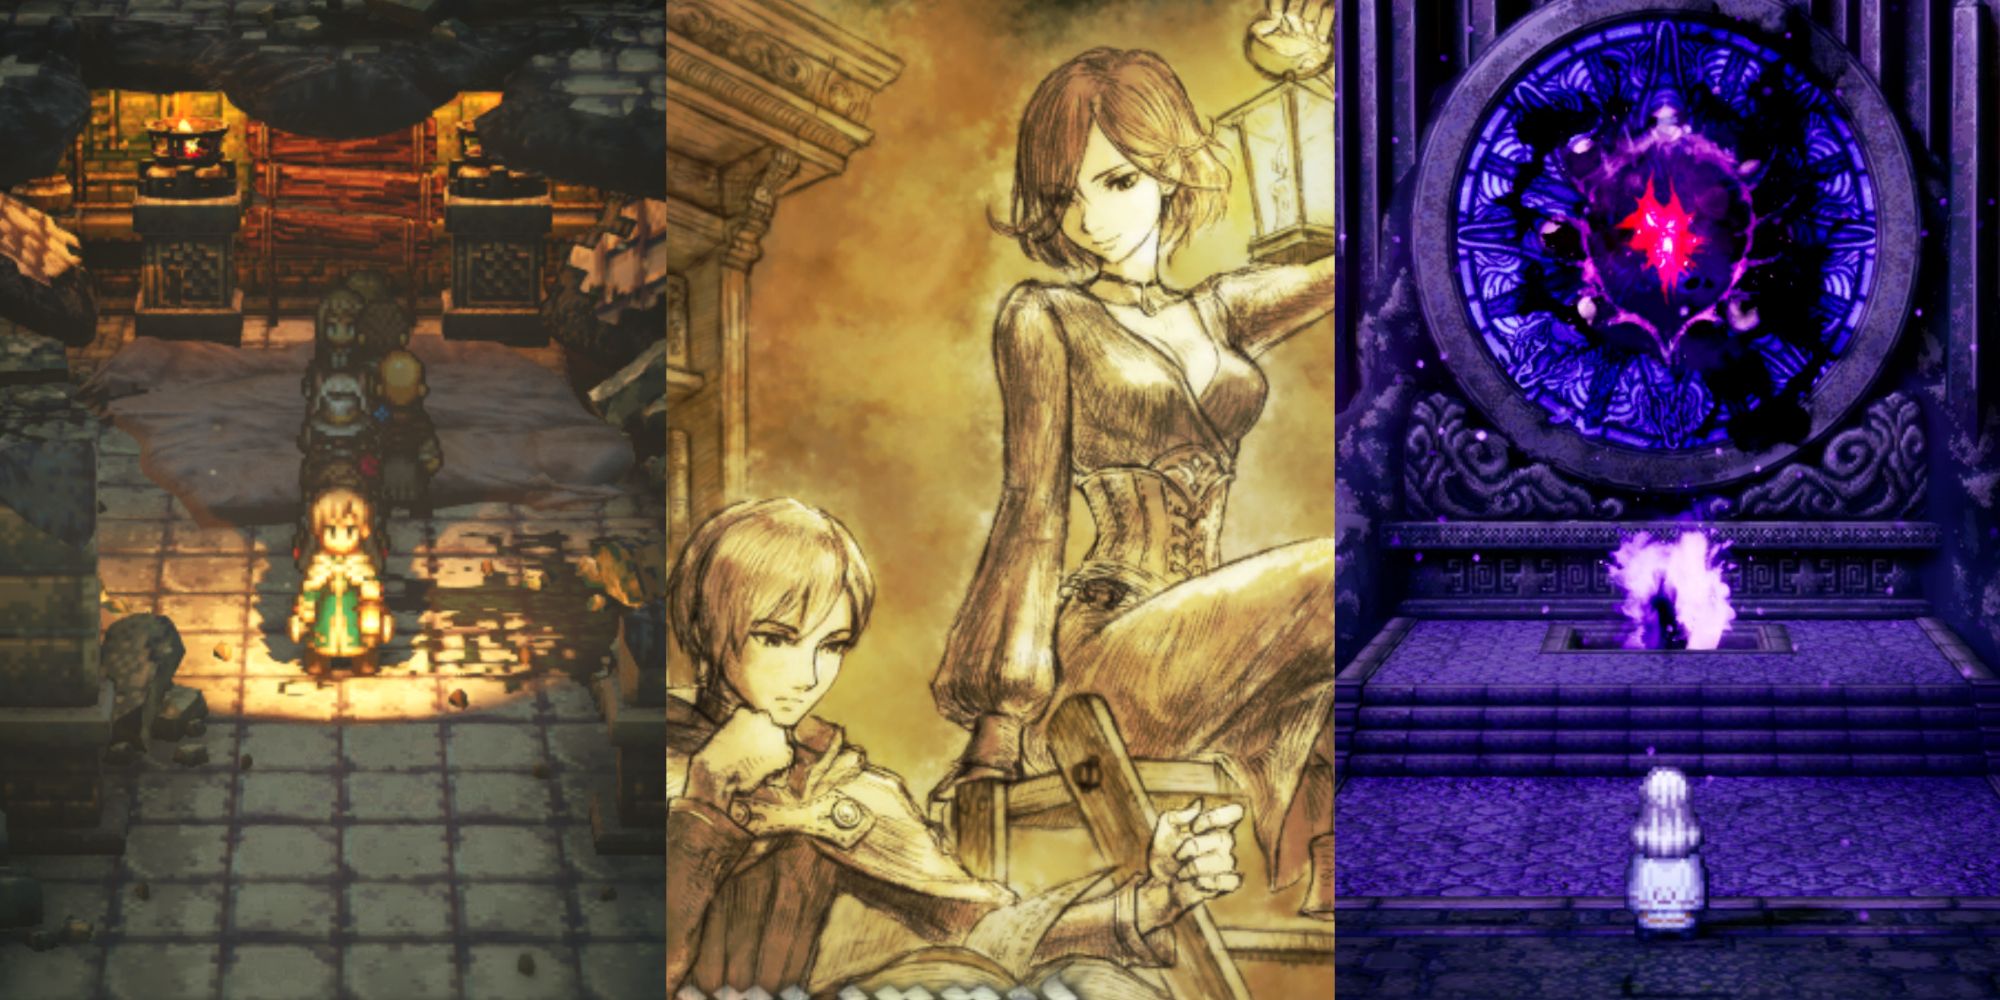 Octopath Traveler 2: 10 Things To Do After You Beat The Game